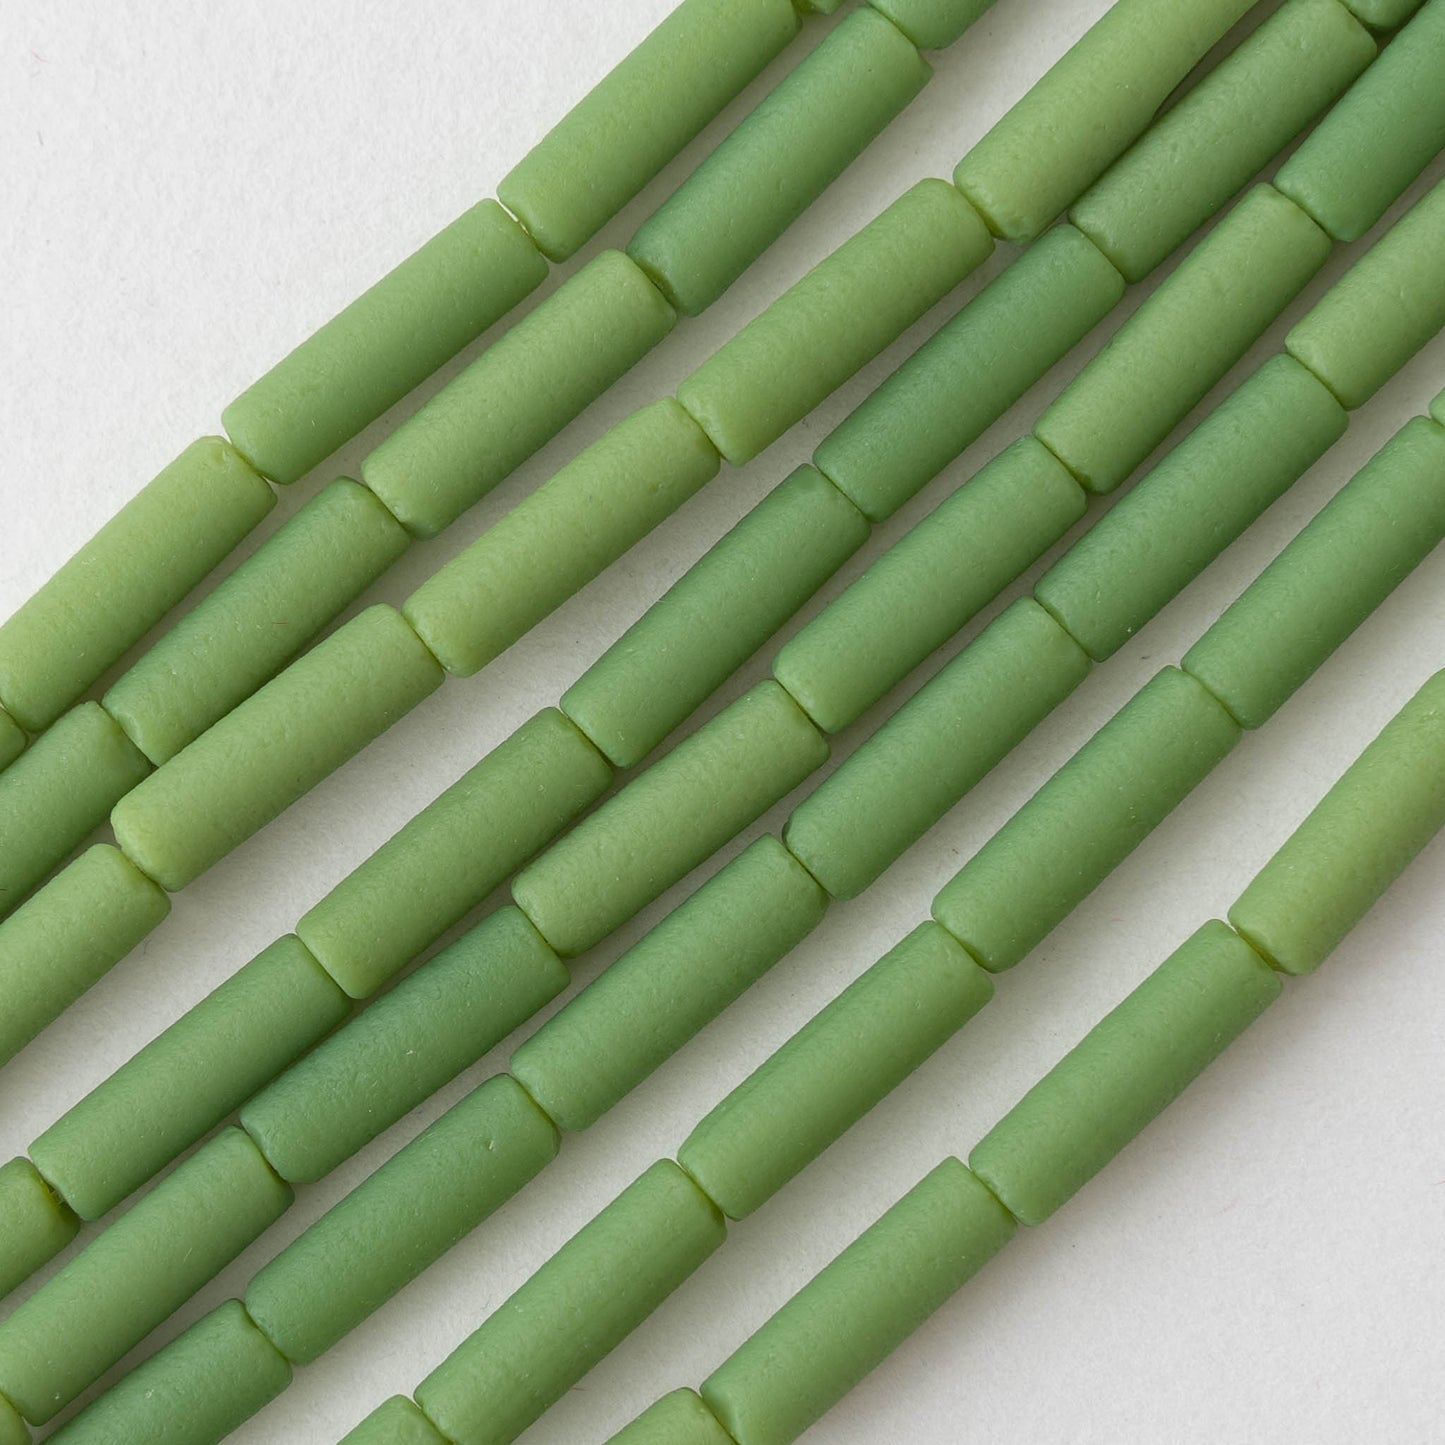 4x14mm Frosted Glass Tube Beads - Opaque Green